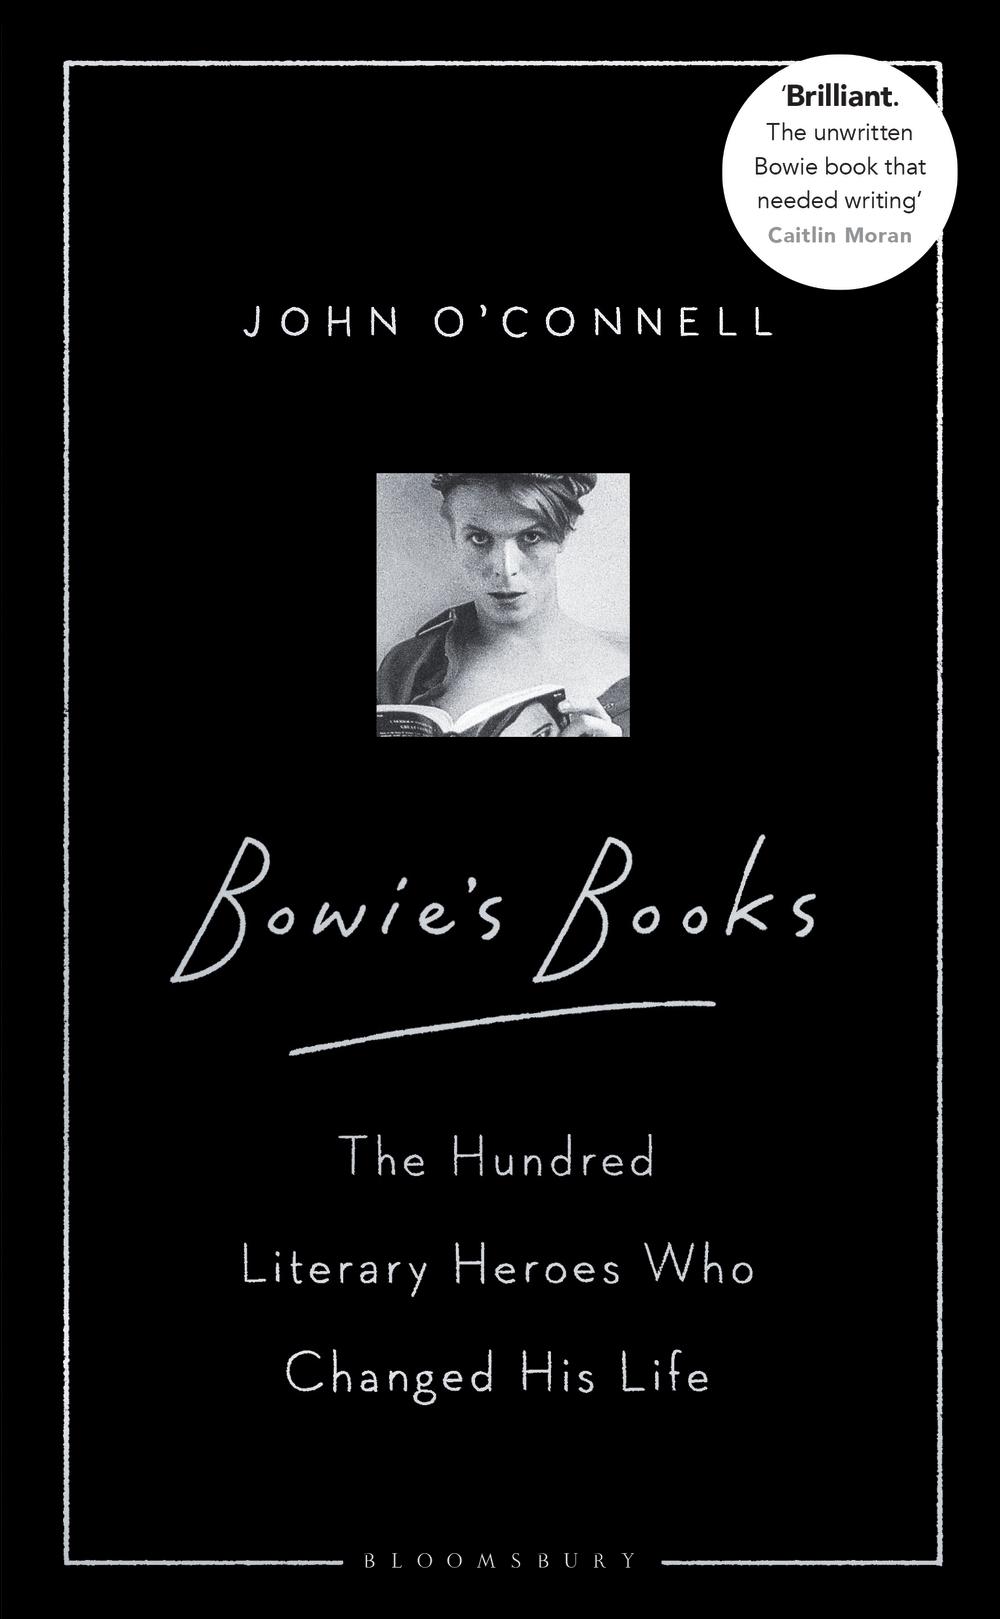 Bowie's Books - John O'Connell